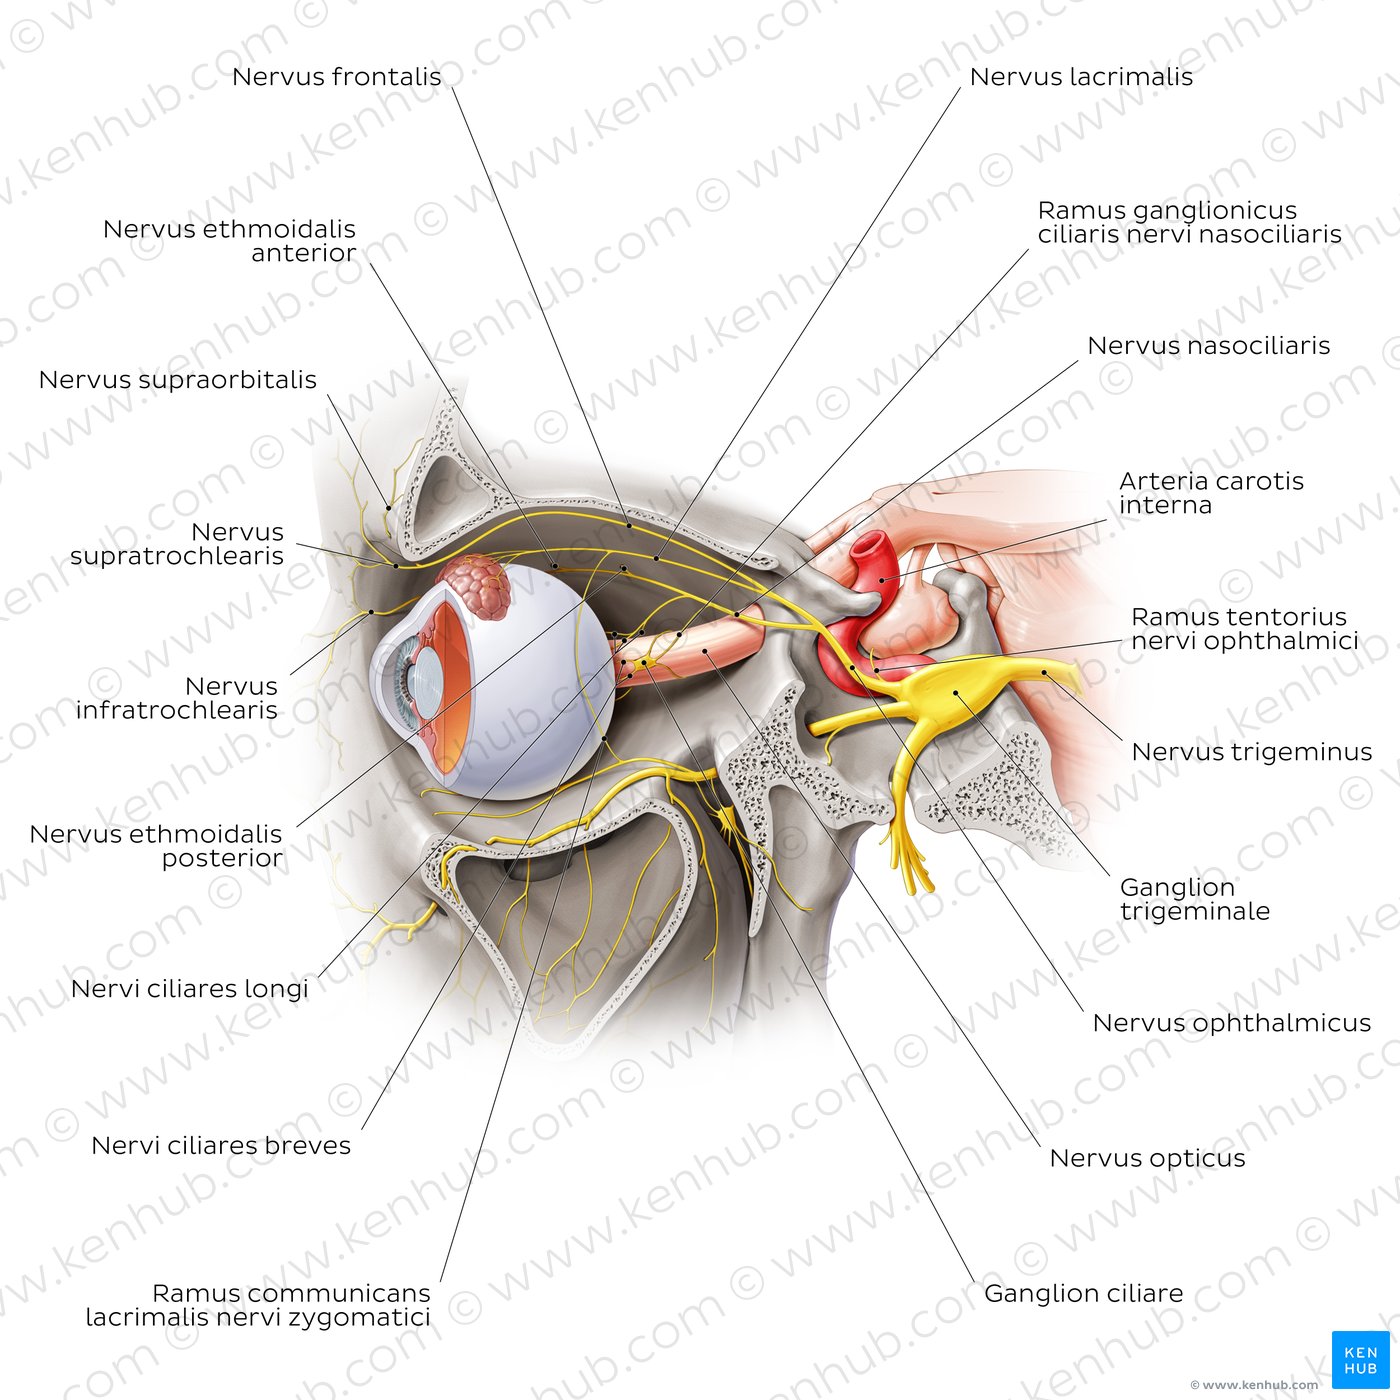 Ophthalmic nerve